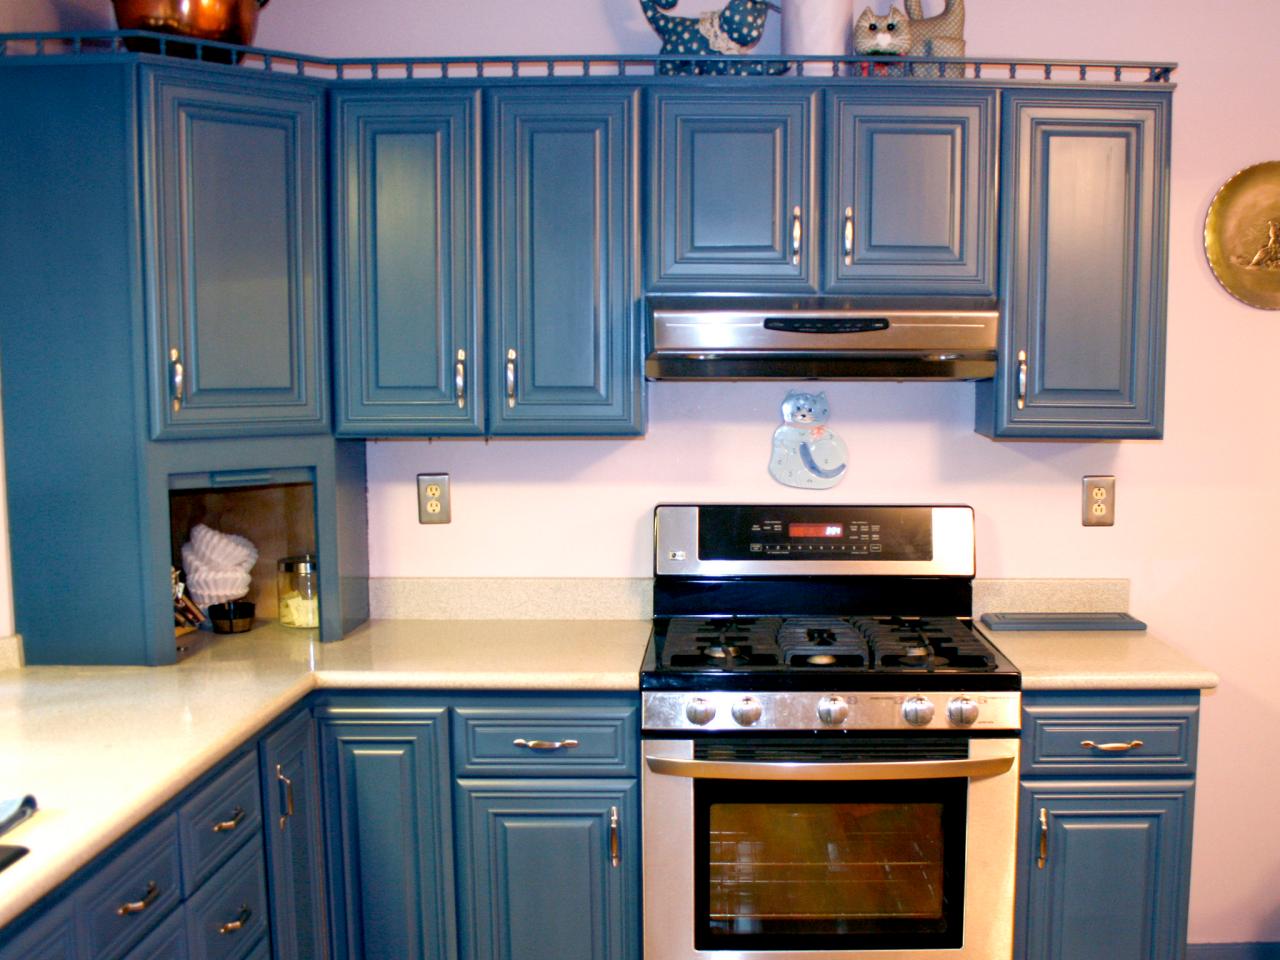 Spray Painting Kitchen Cabinets Pictures Ideas From HGTV HGTV